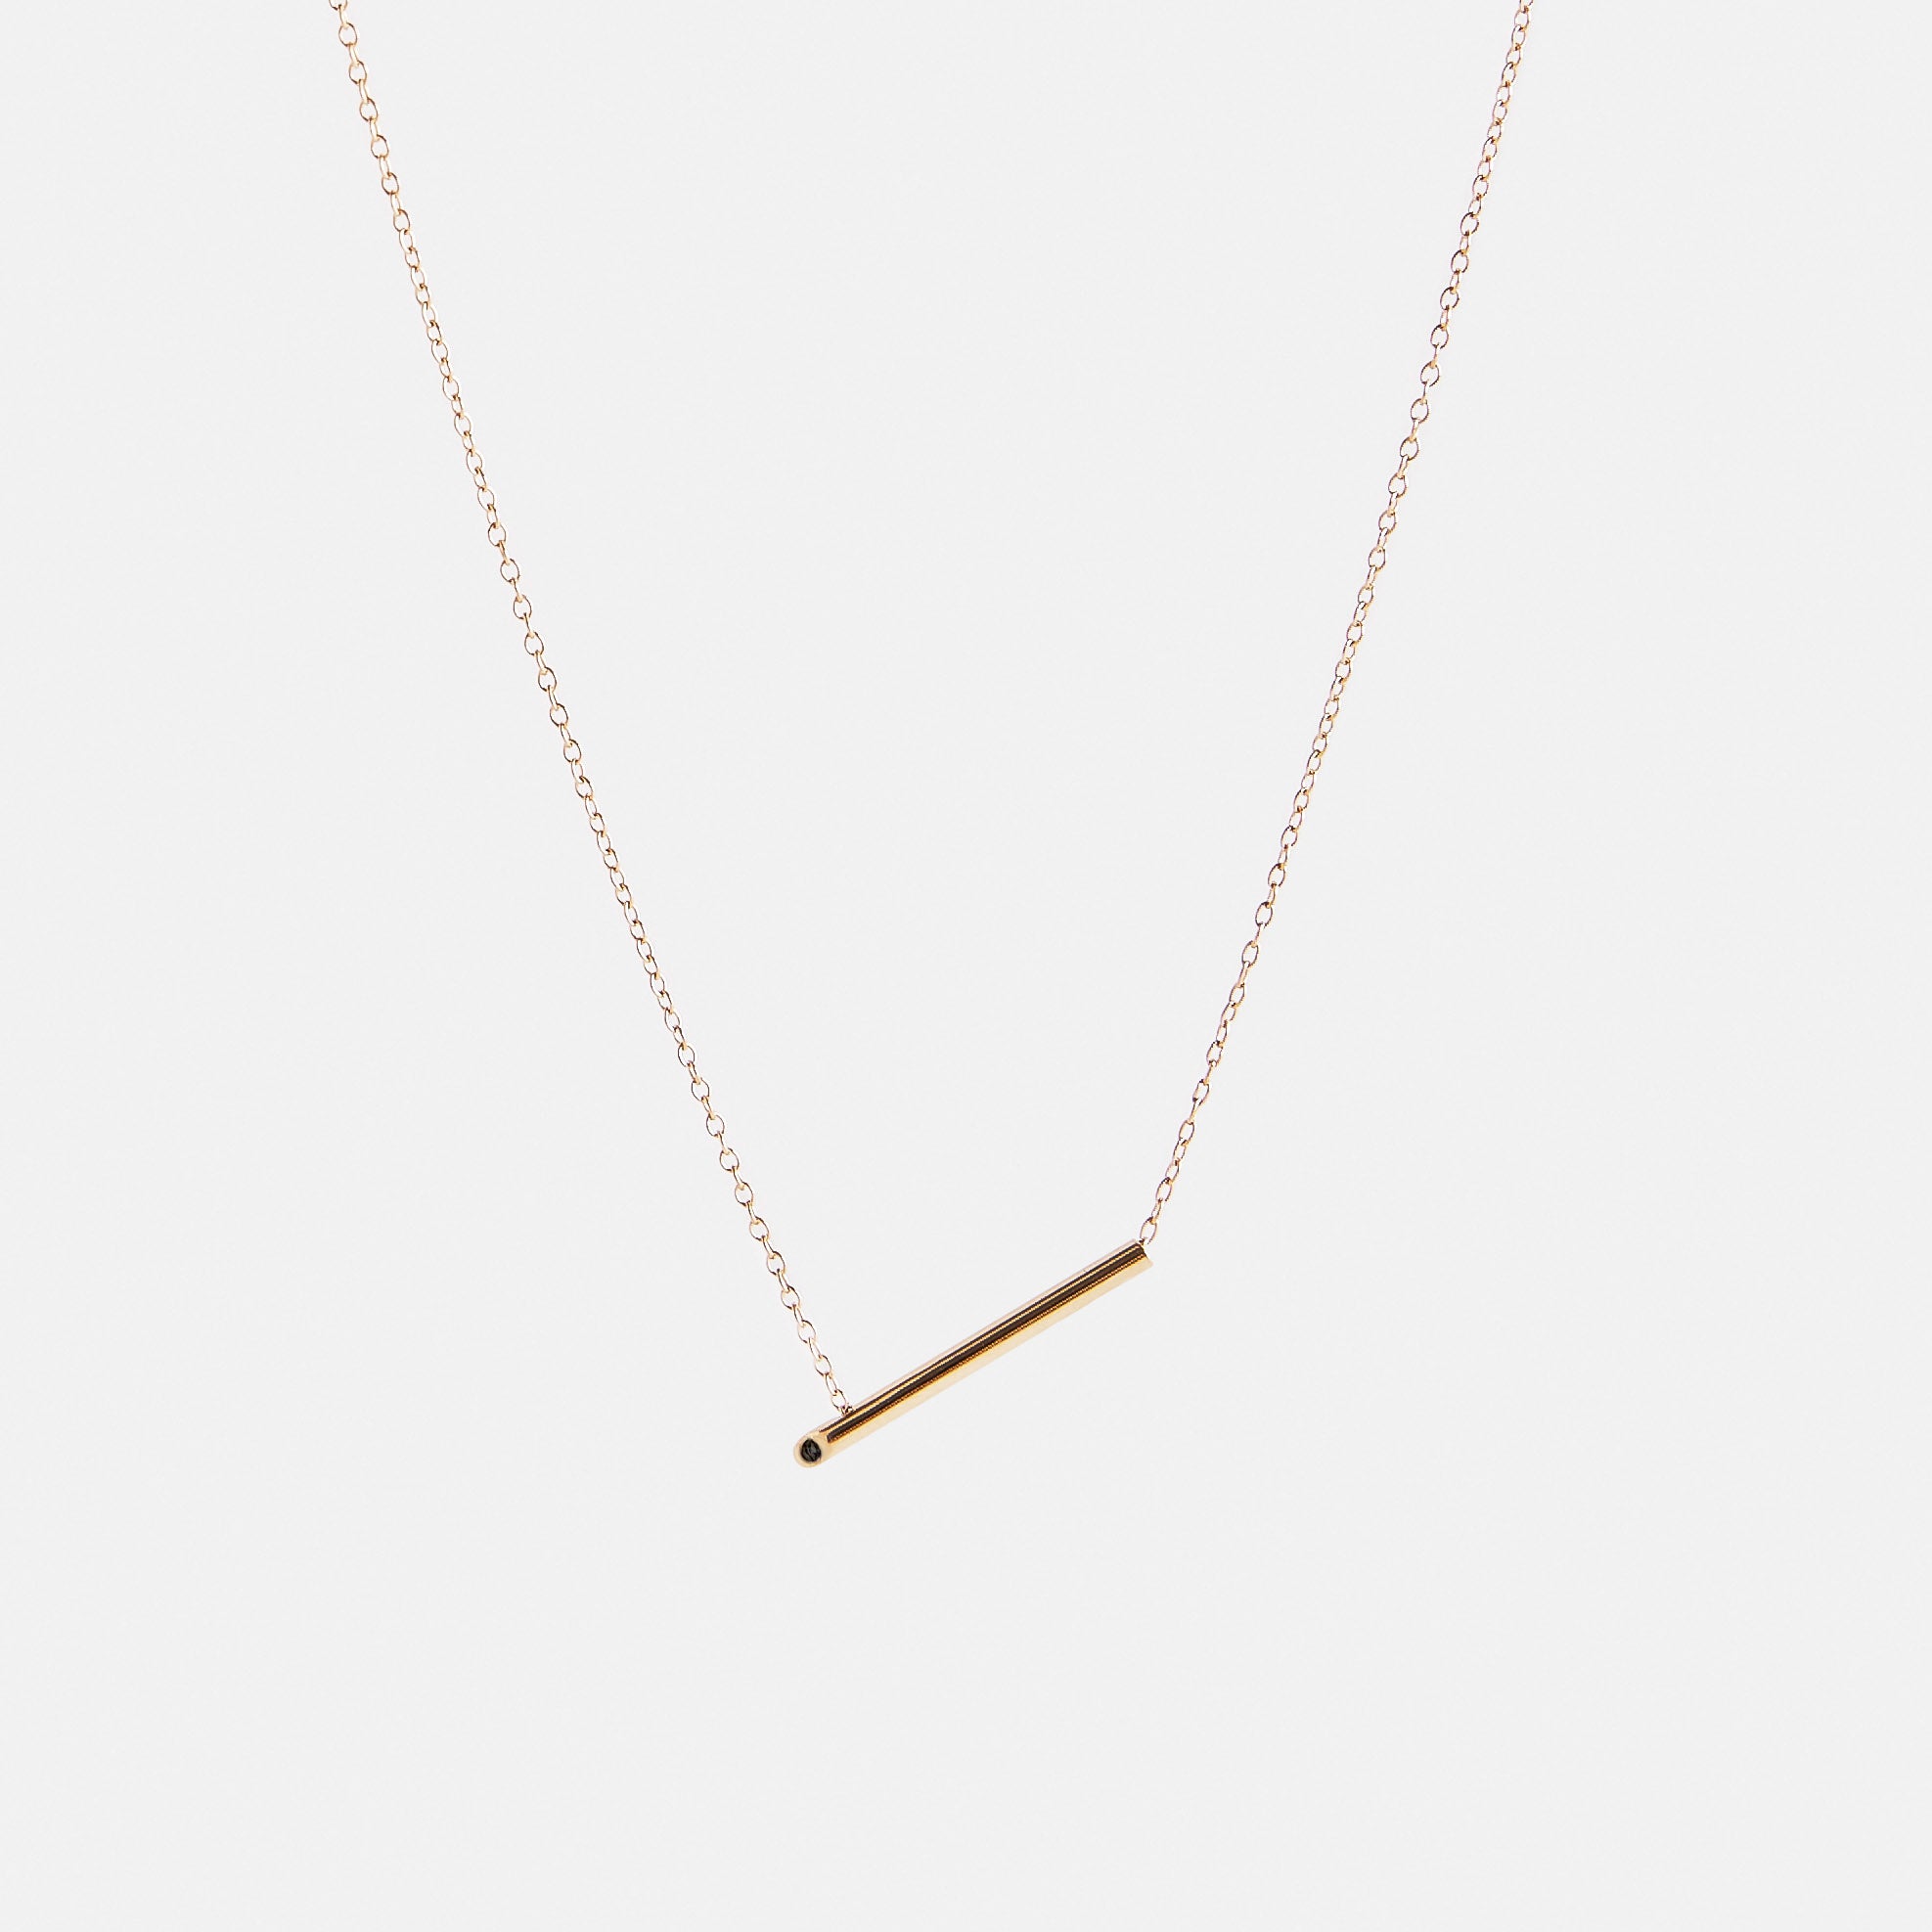 Essa Unique Necklace in 14k Gold set with White Diamond By SHW Fine Jewelry New York City